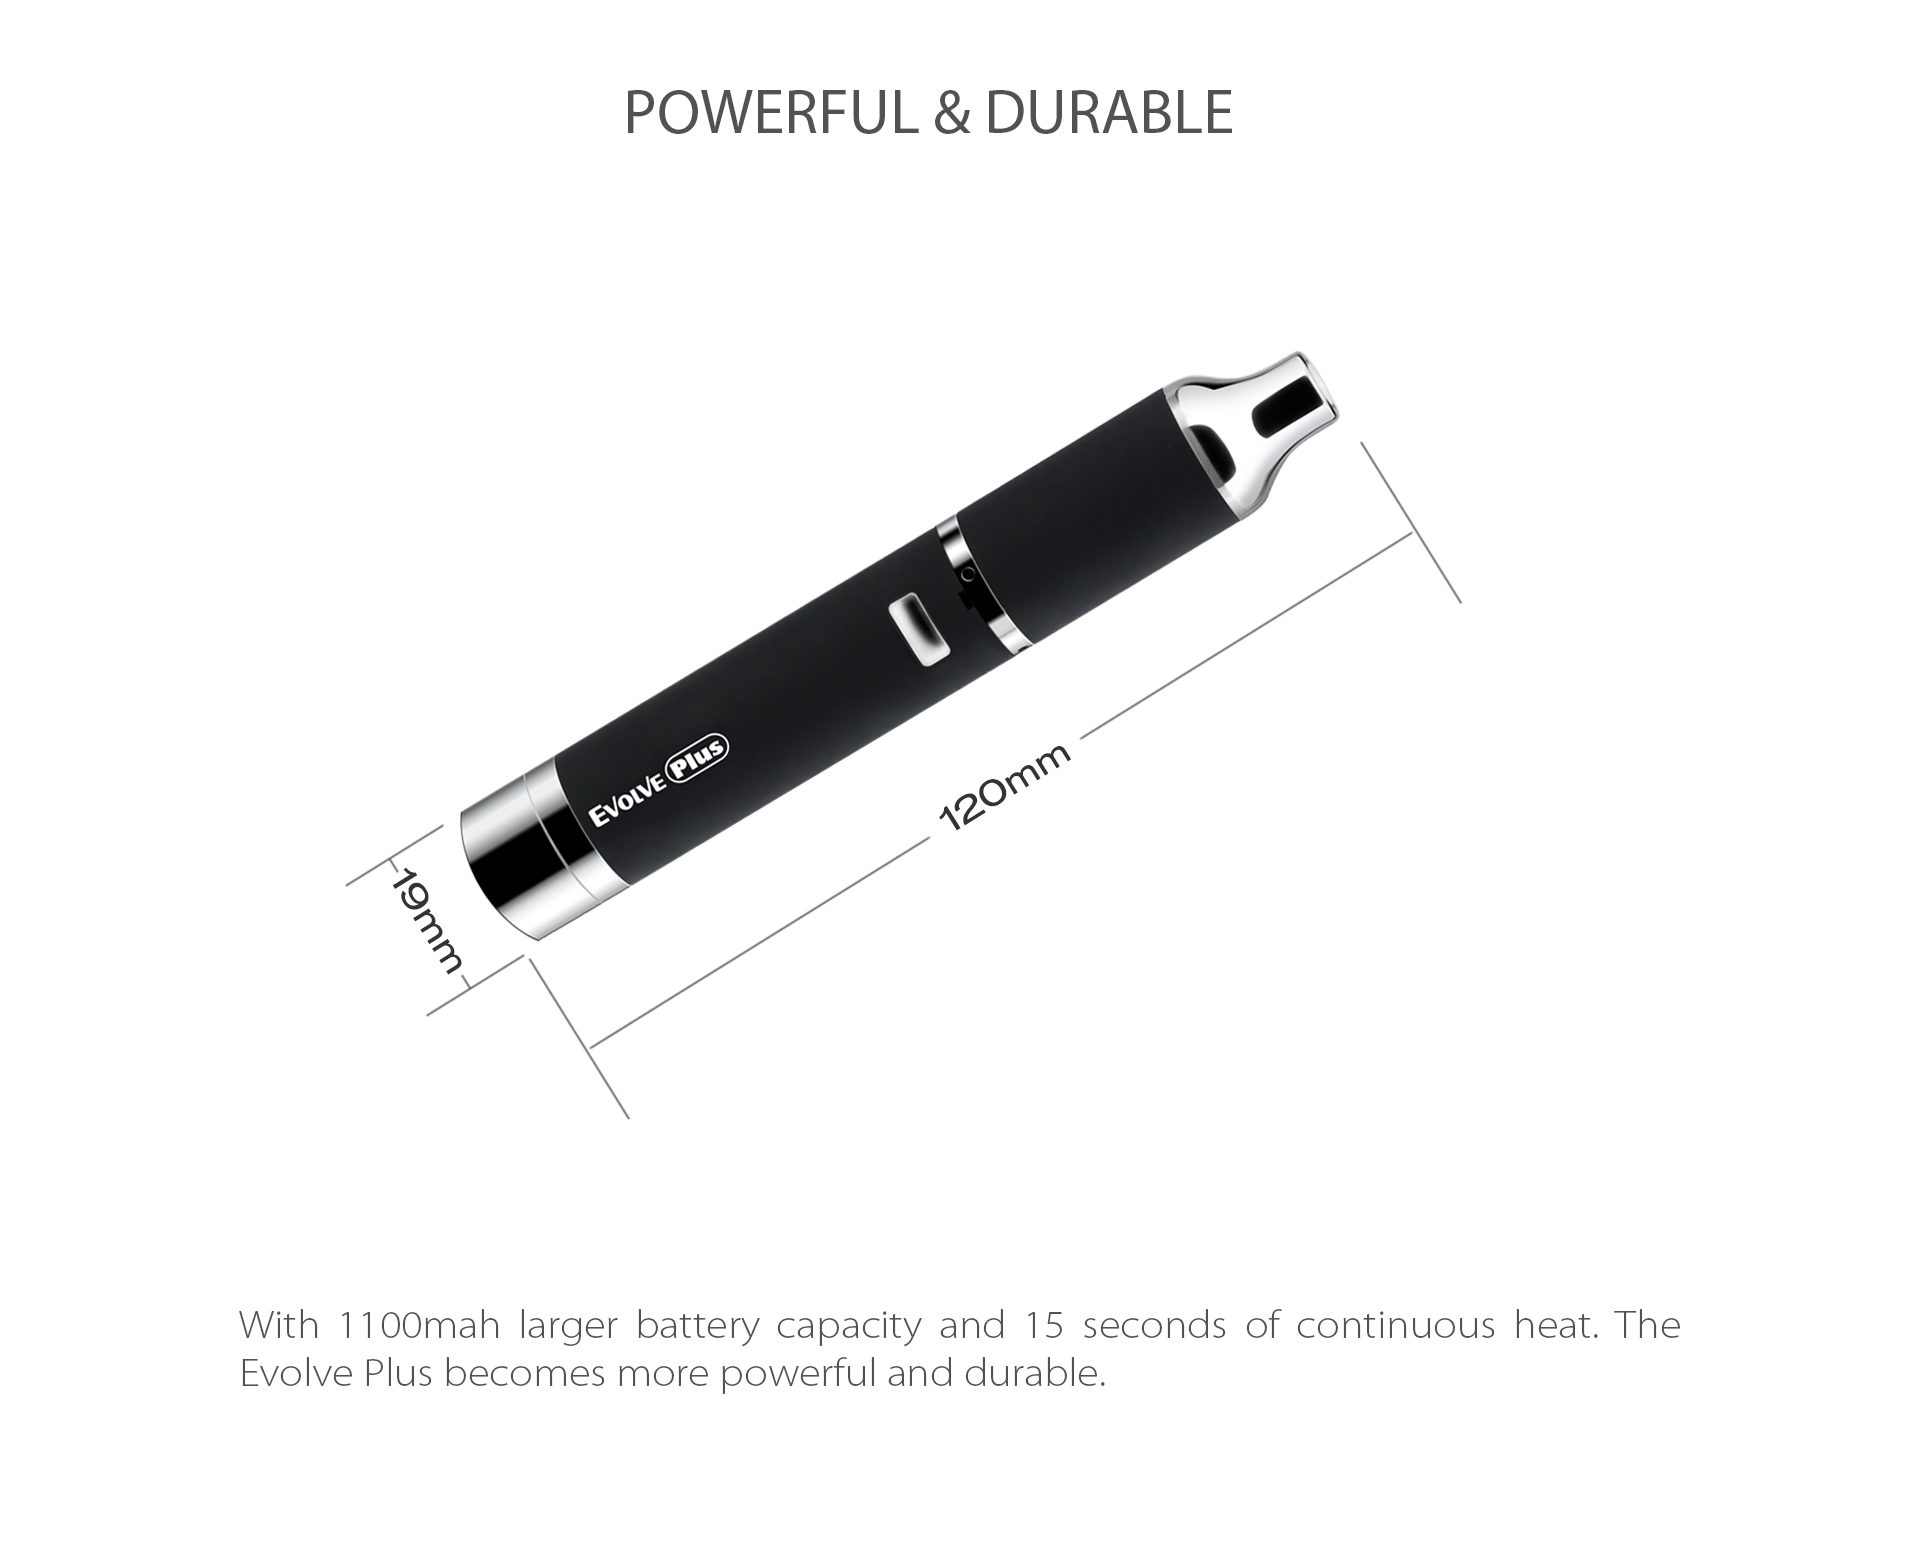 Yocan Evolve-Plus vaporizer pen 2020 version becomes more powerful and durable.